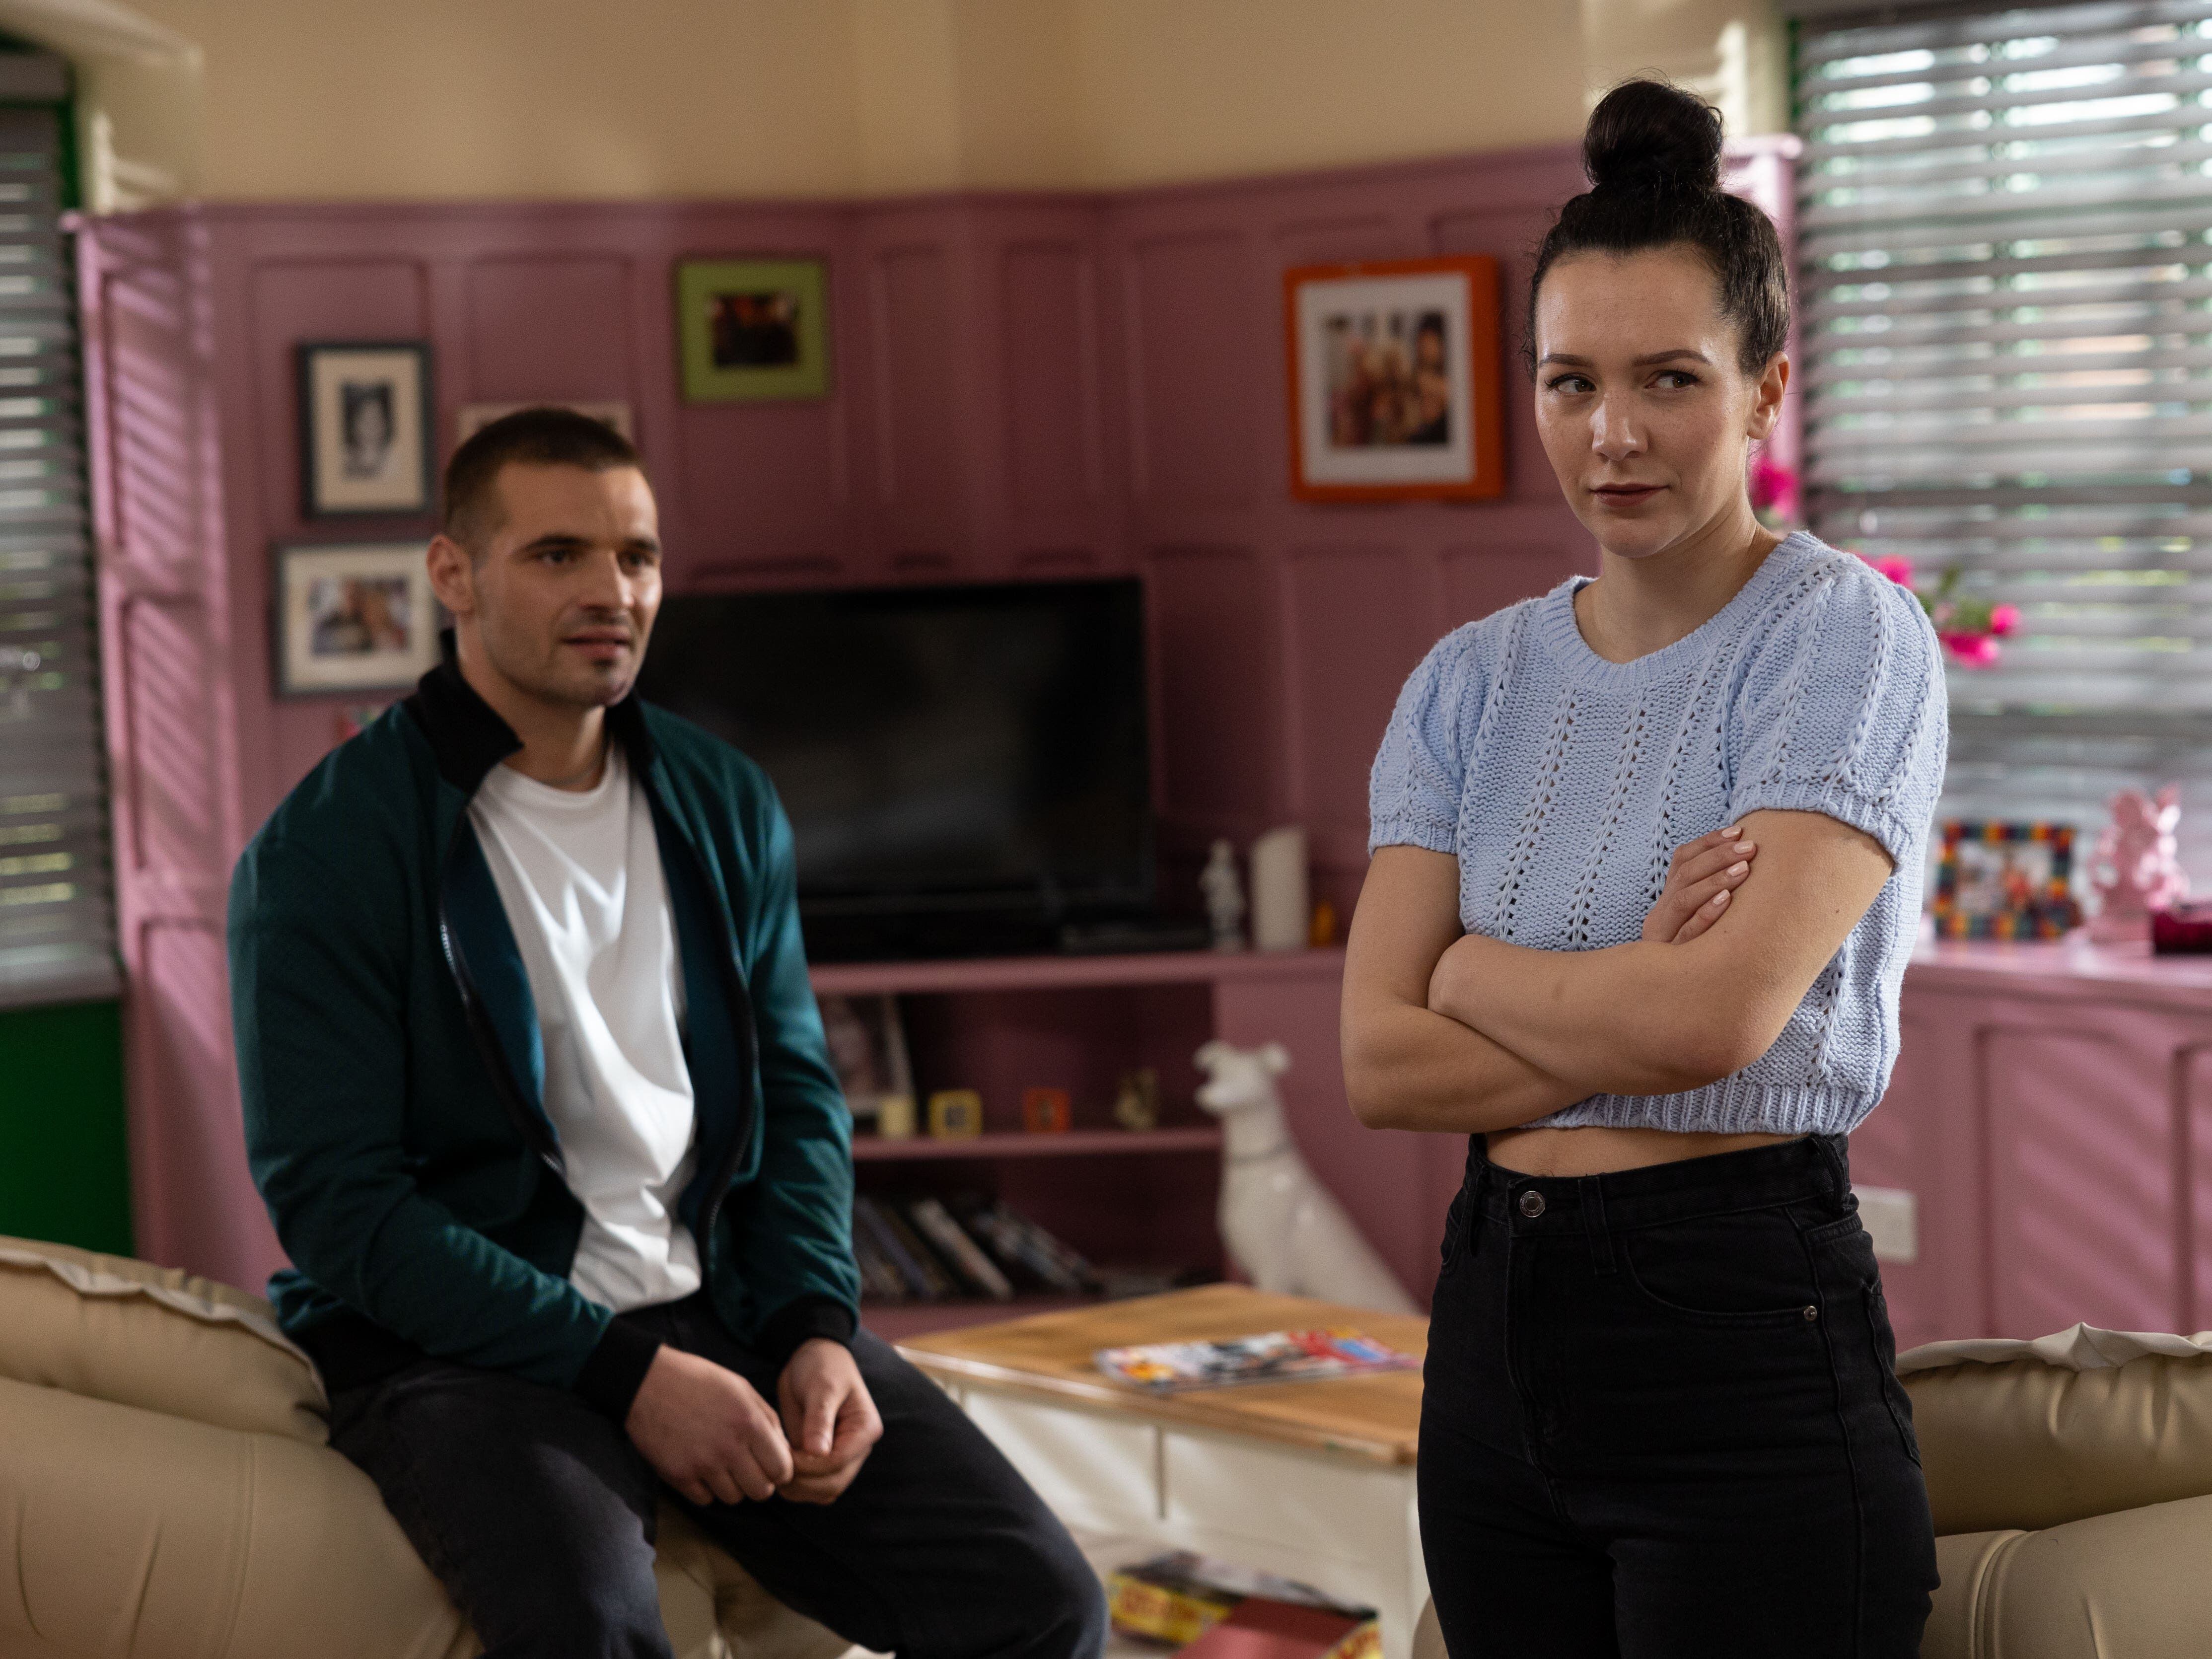 Hollyoaks partners with Home Office for coercive control storyline